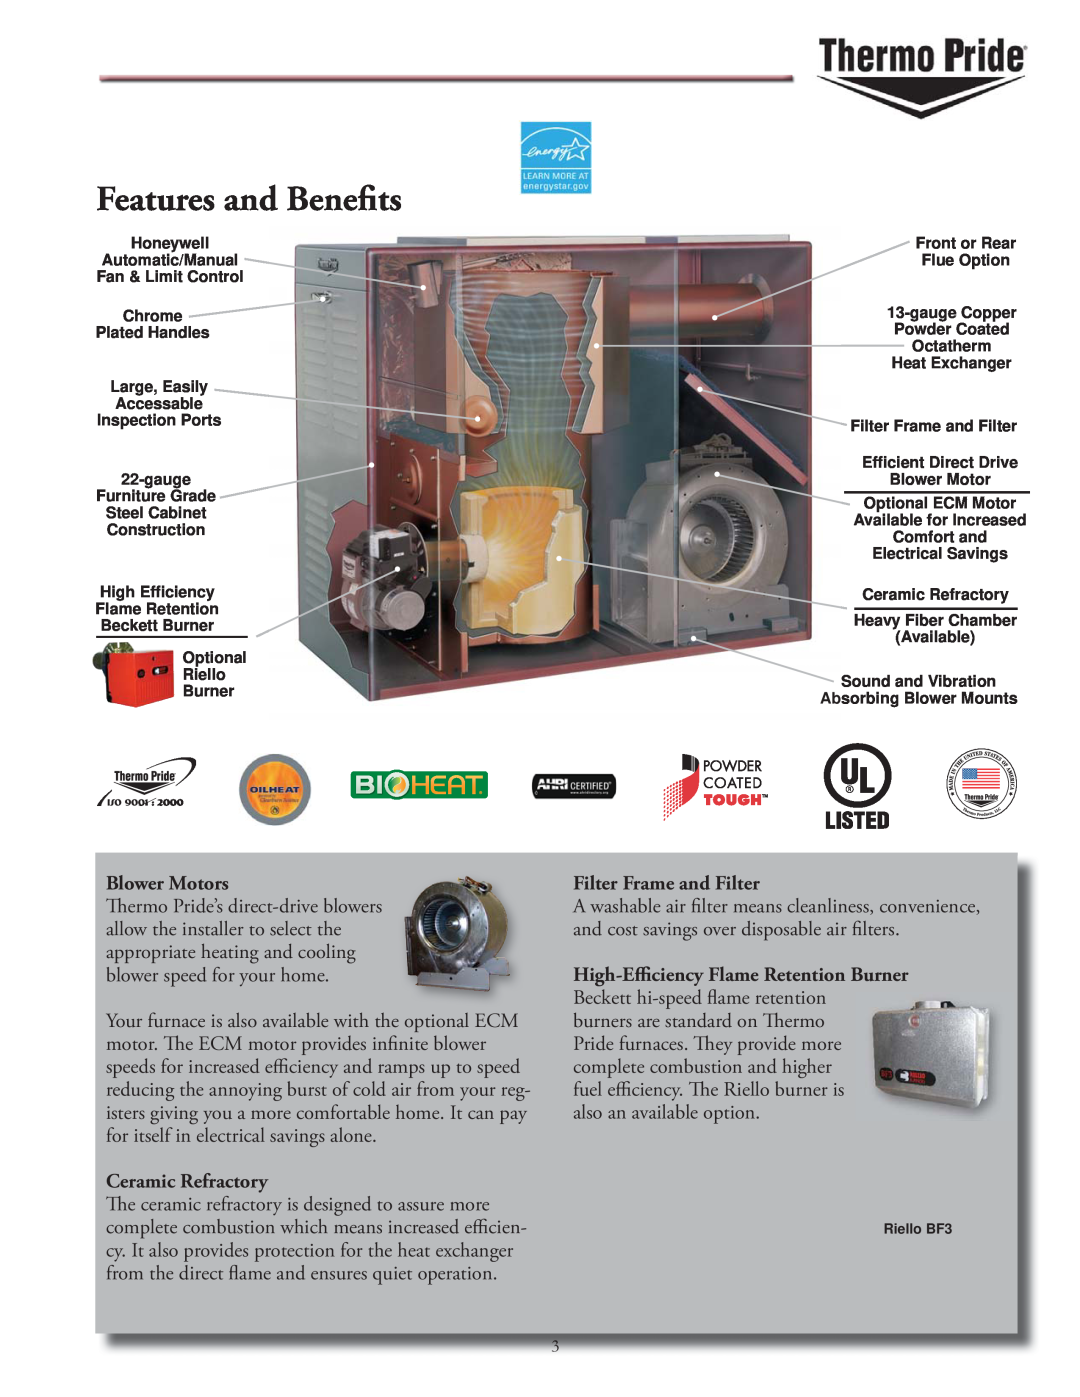 Thermo Products OL5-OL39, OT11-OT16 manual Features and Benefits, Blower Motors, Ceramic Refractory, Filter Frame and Filter 